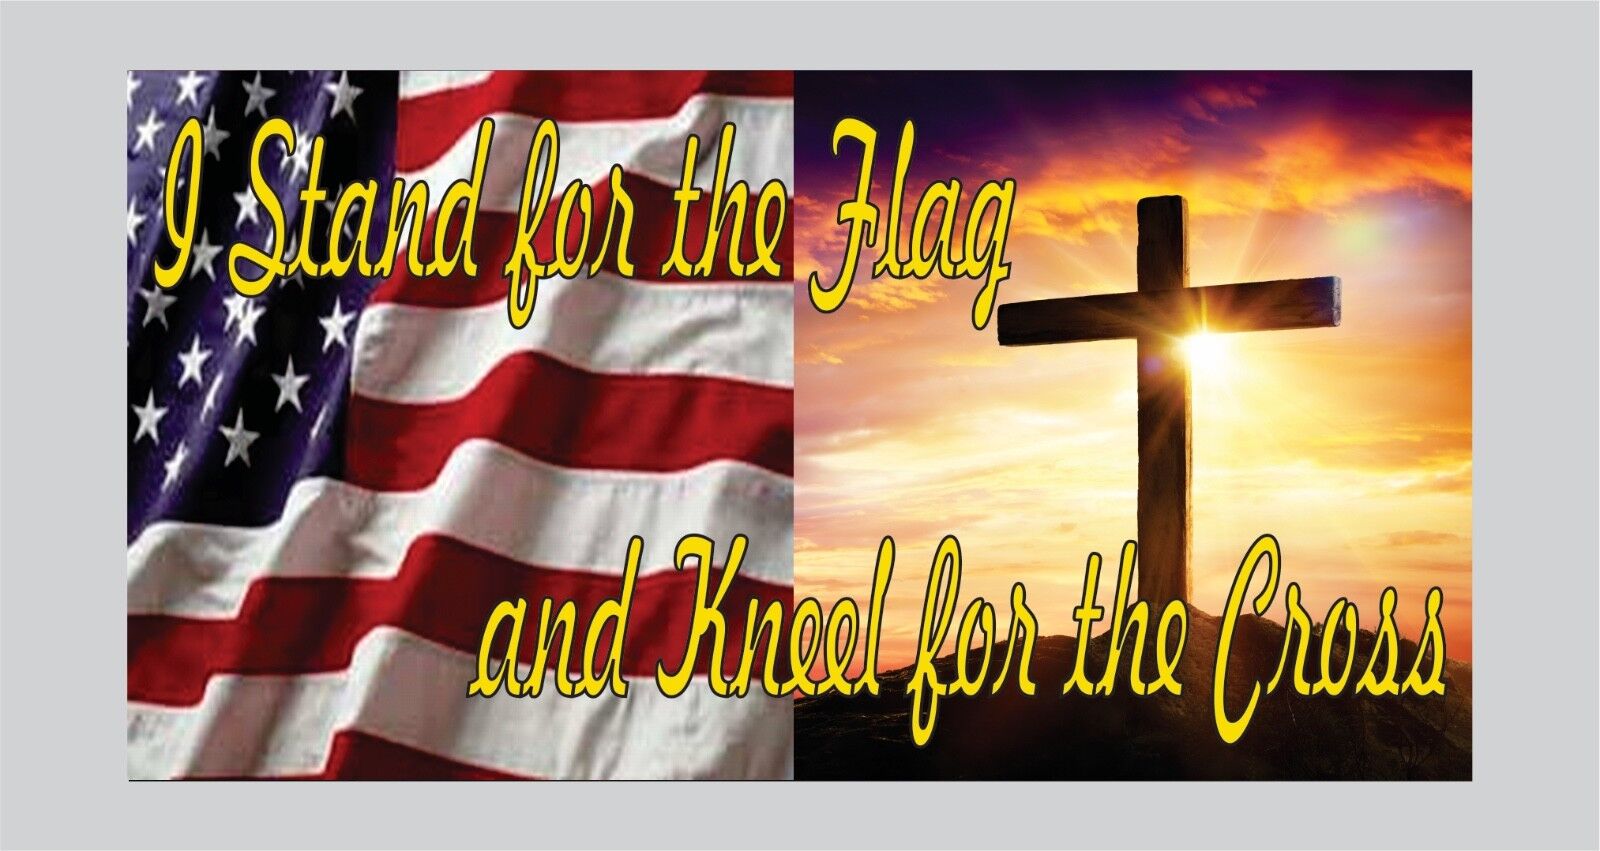 I Stand for the Flag Kneel for the Cross Bumper sticker decal America Support 